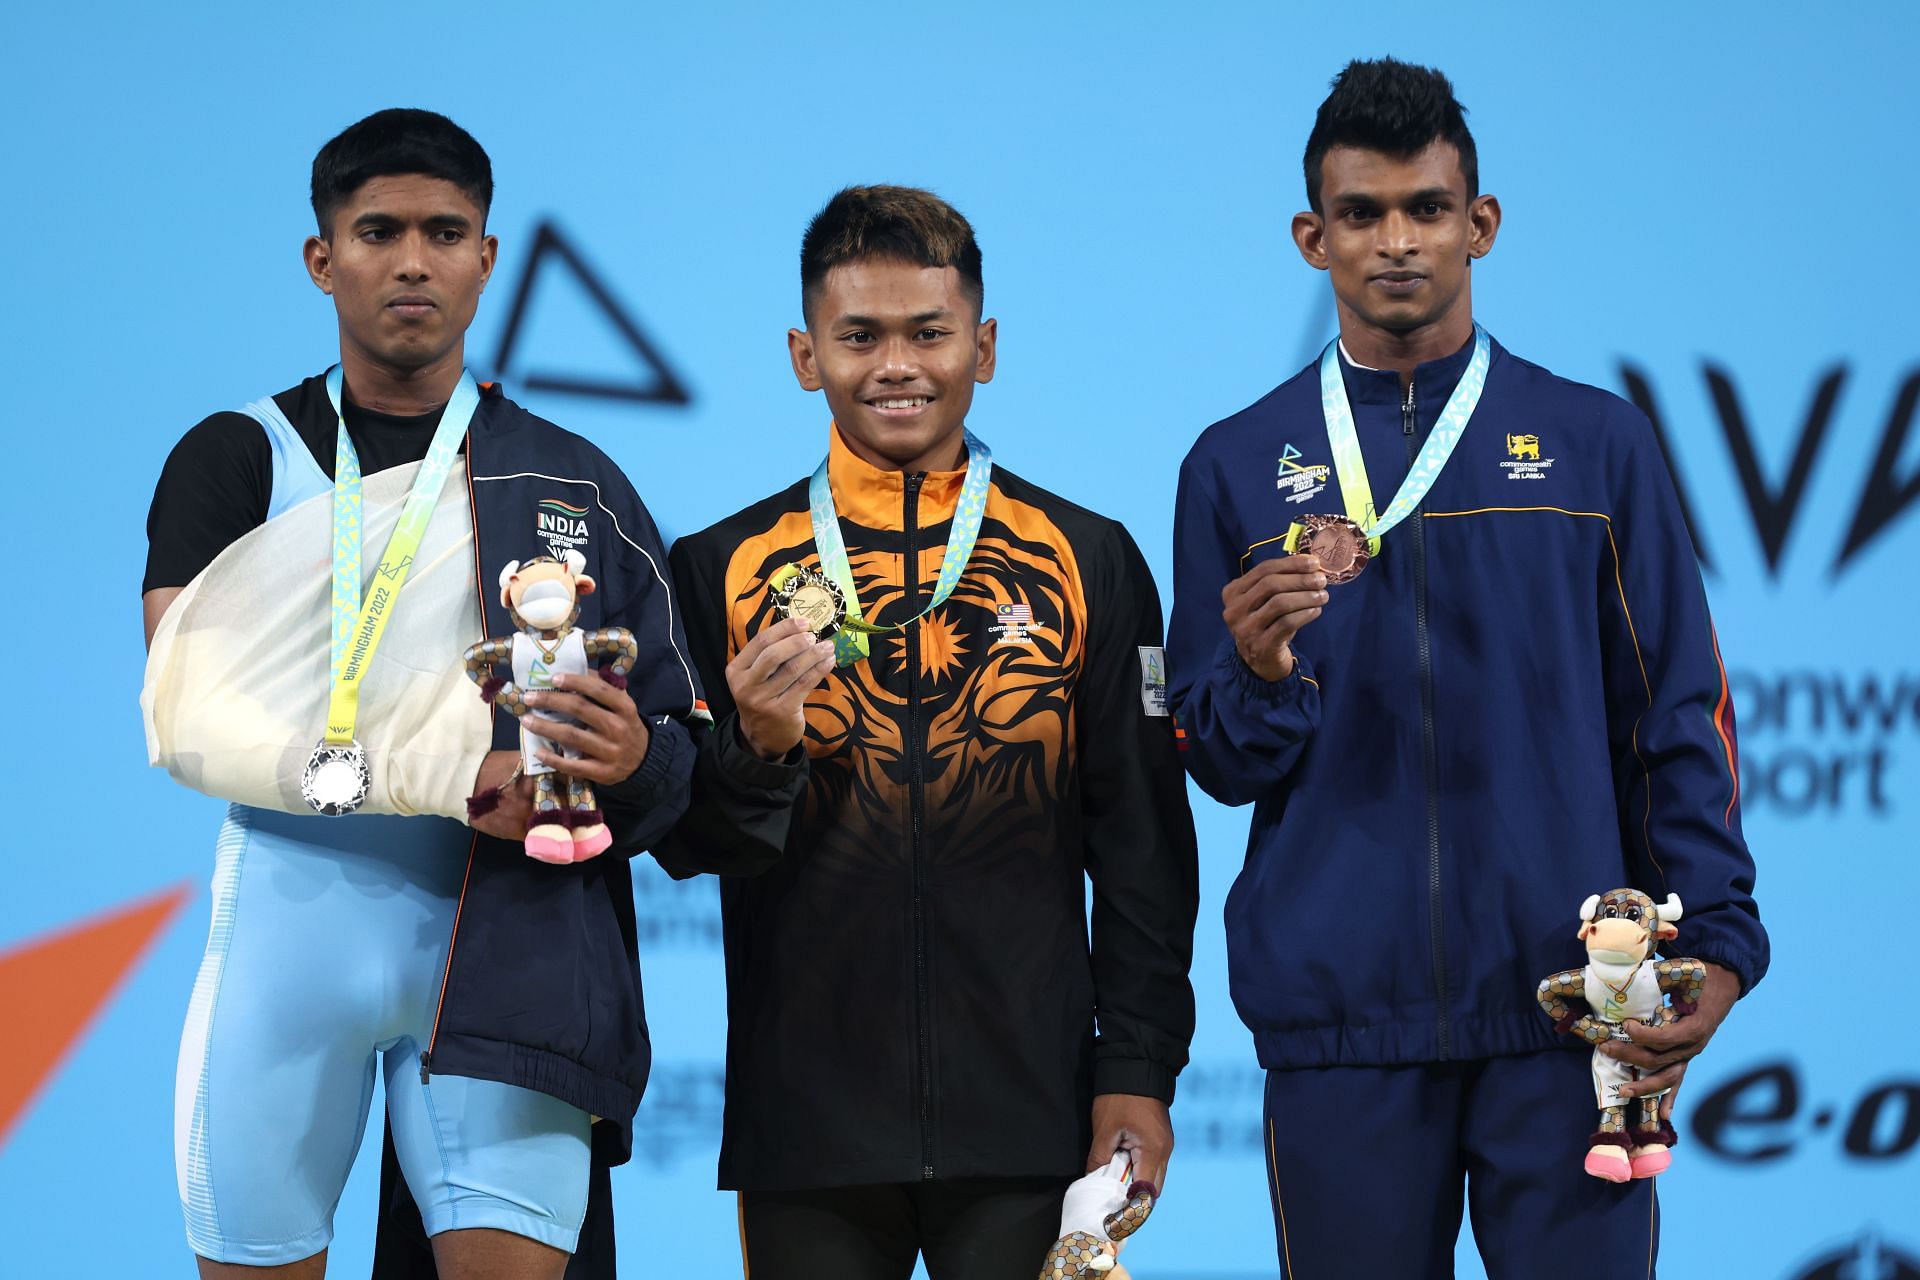 Sanket Madadev Sargar (extreme left) during the medal ceremony at the 2022 Commonwealth Games (Image courtesy: Getty)